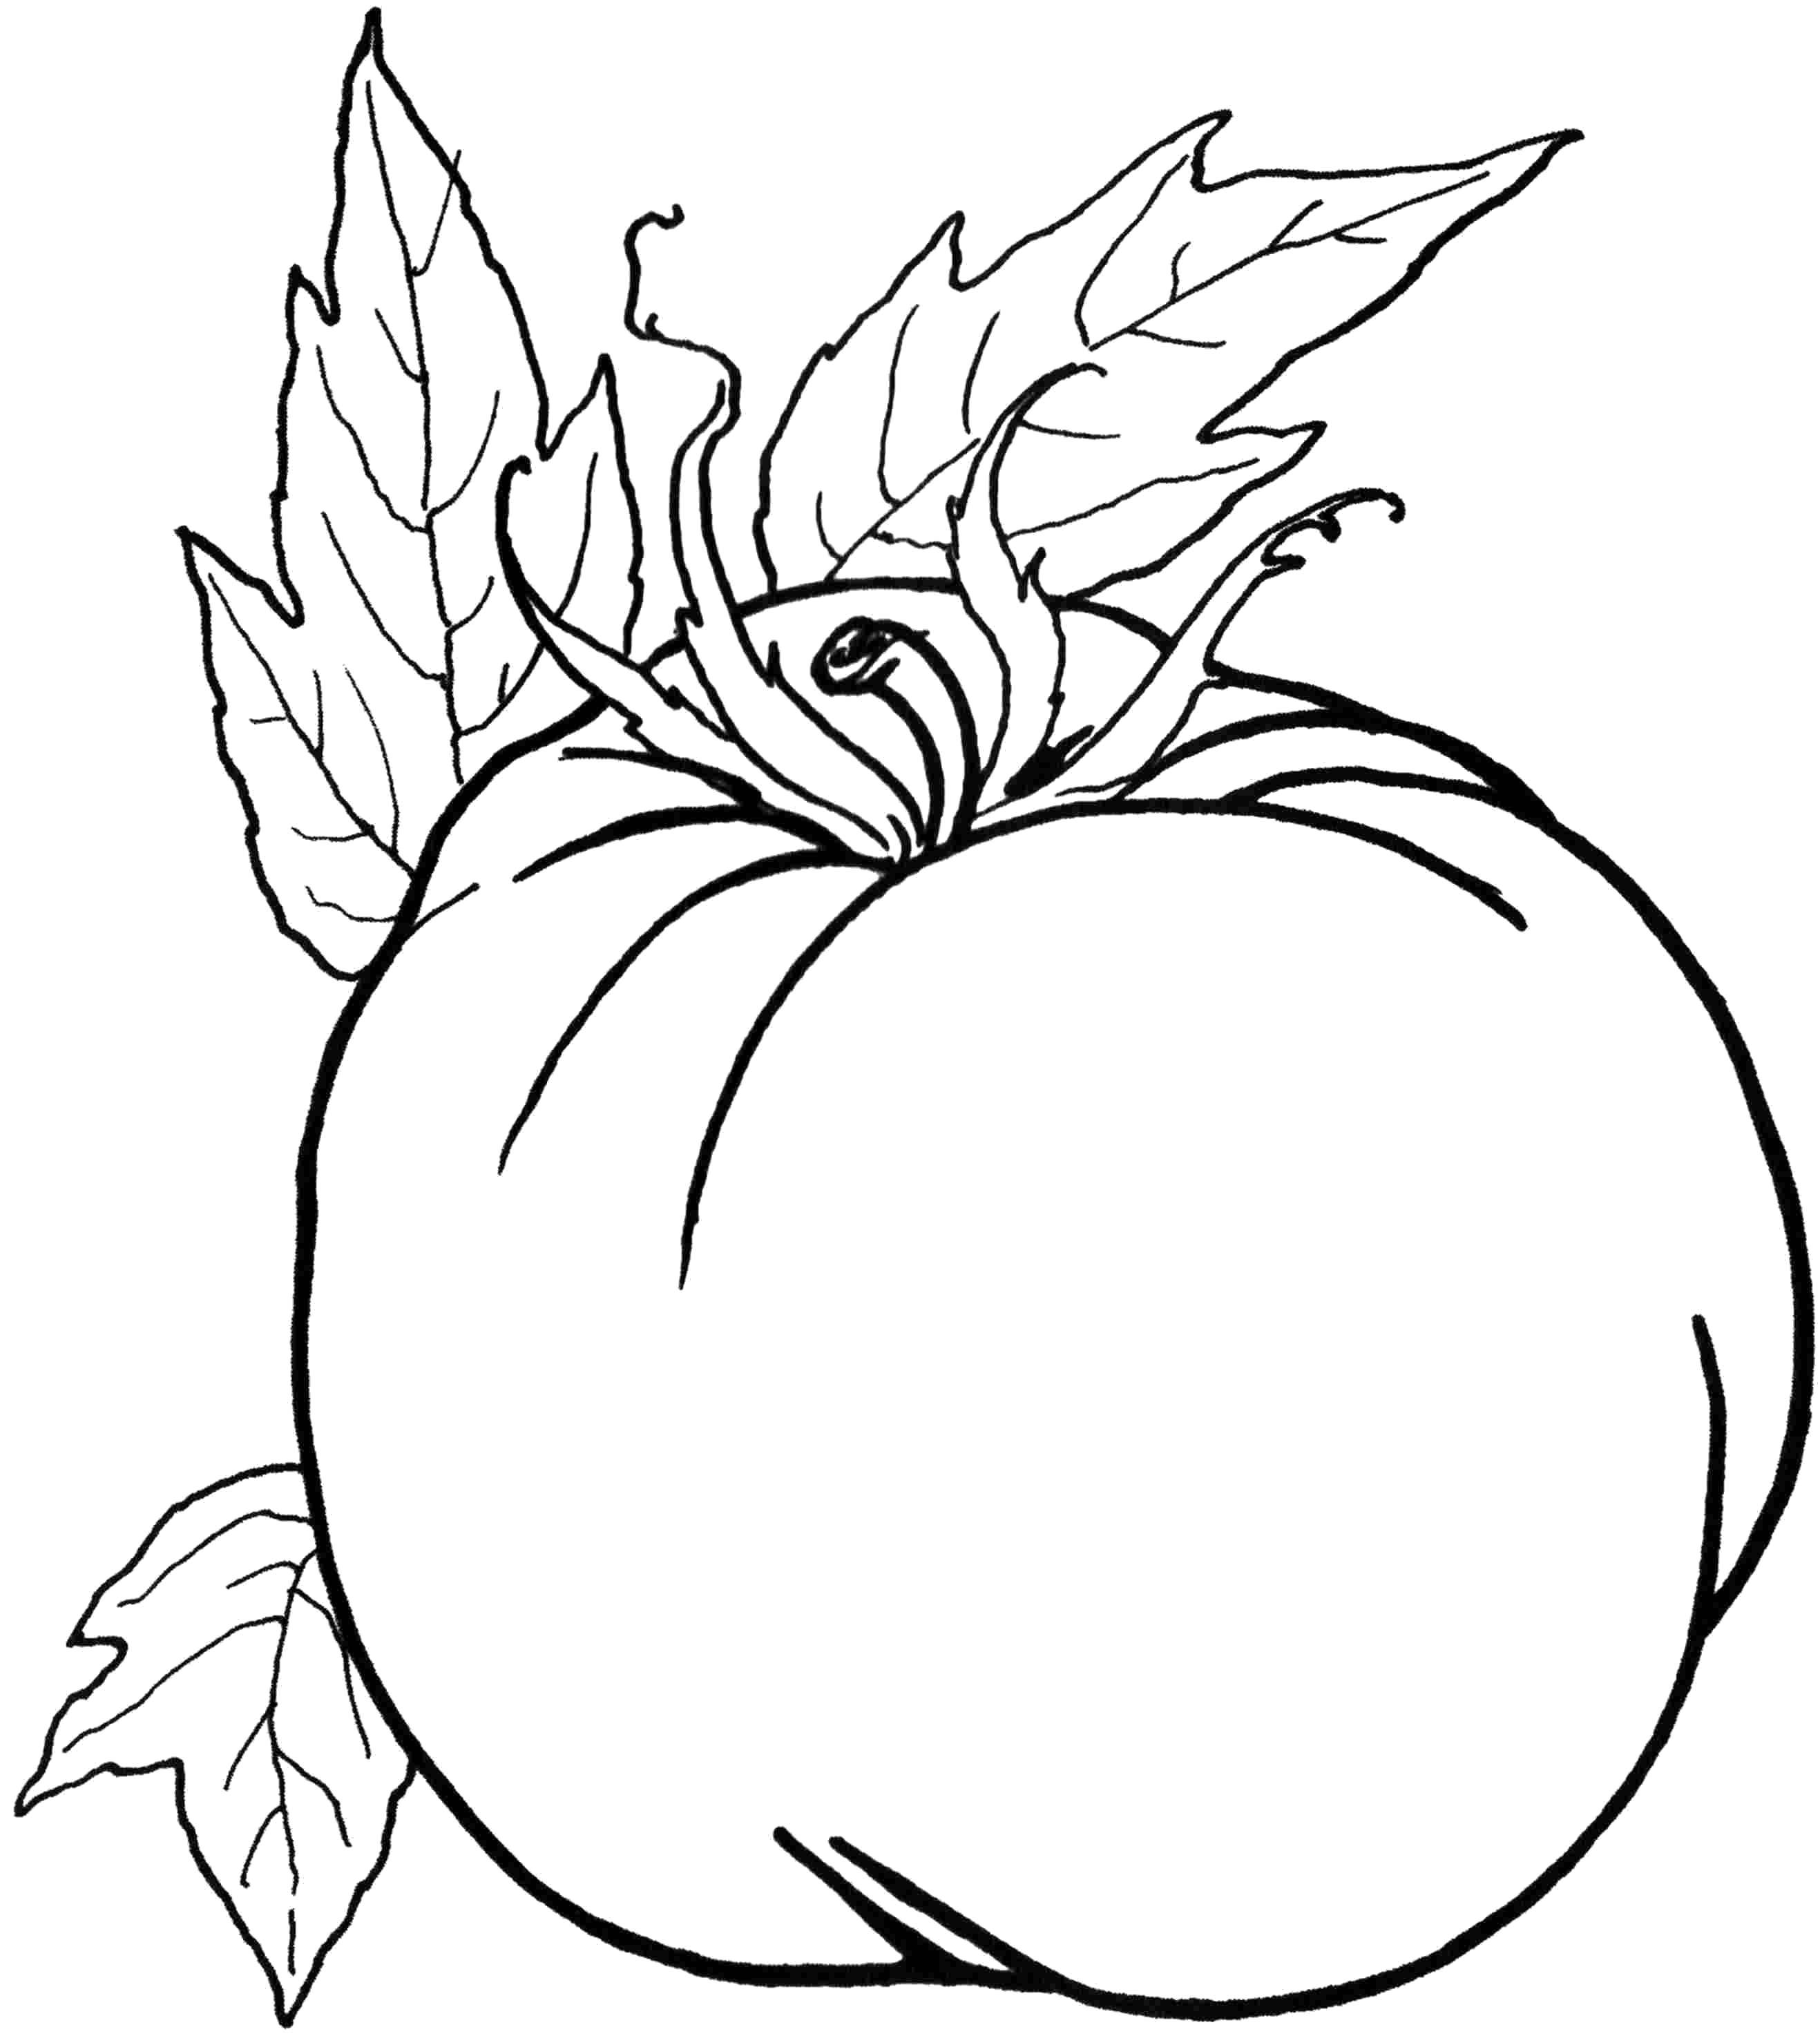 Coloring Tomato. Category Vegetables in English. Tags:  English, vegetables.